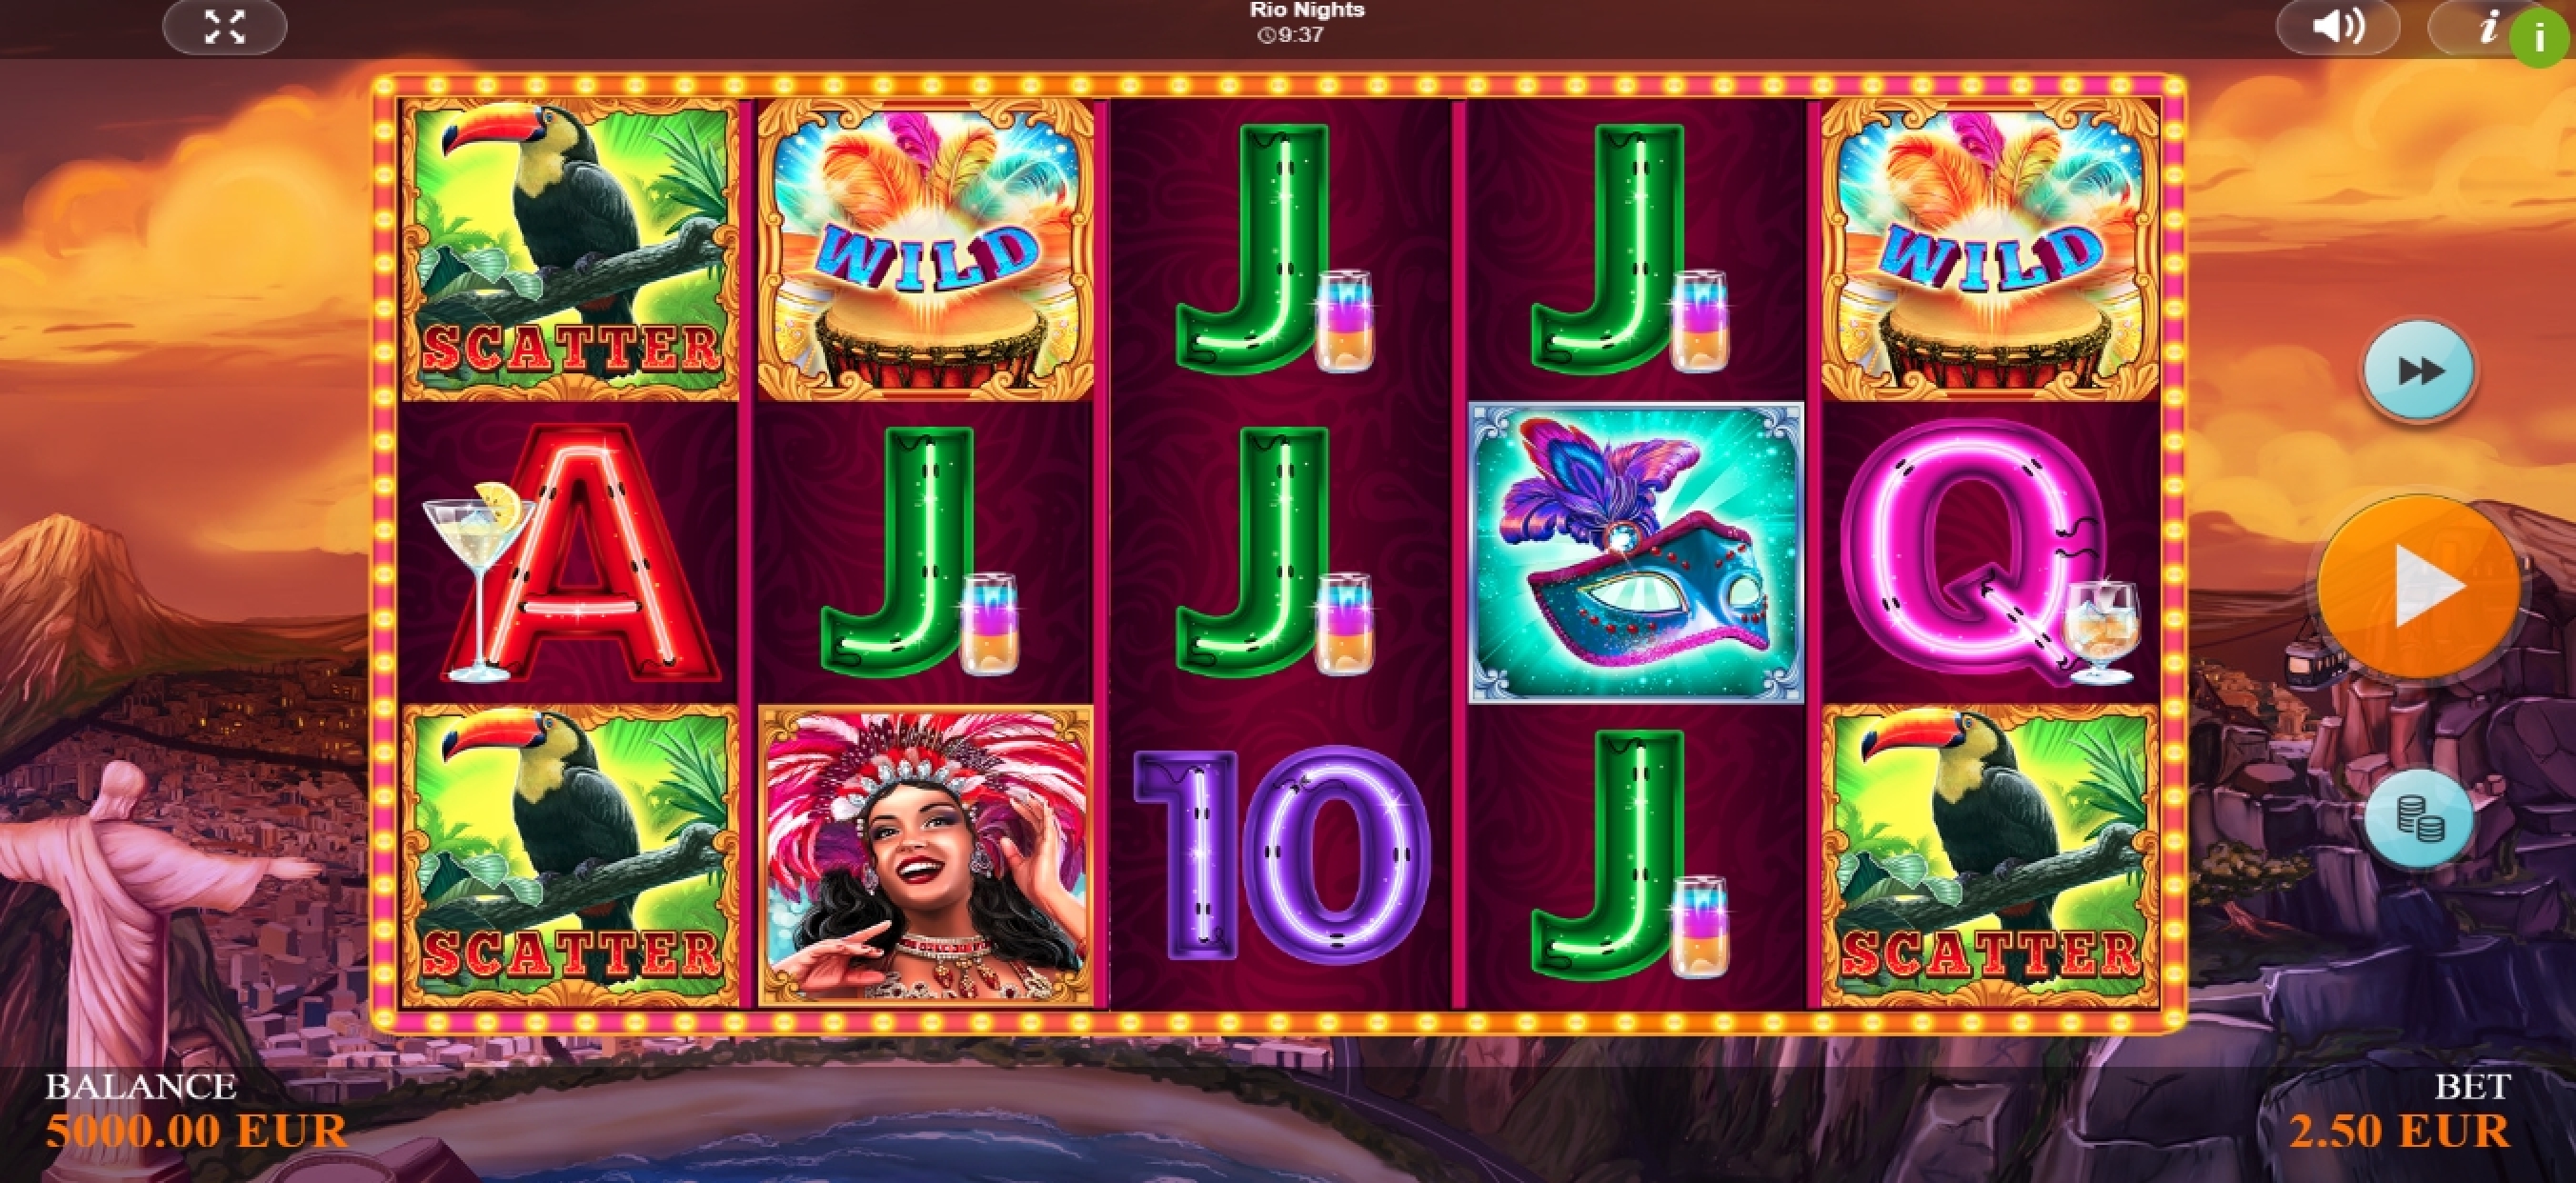 Reels in Rio Nights Slot Game by betiXon